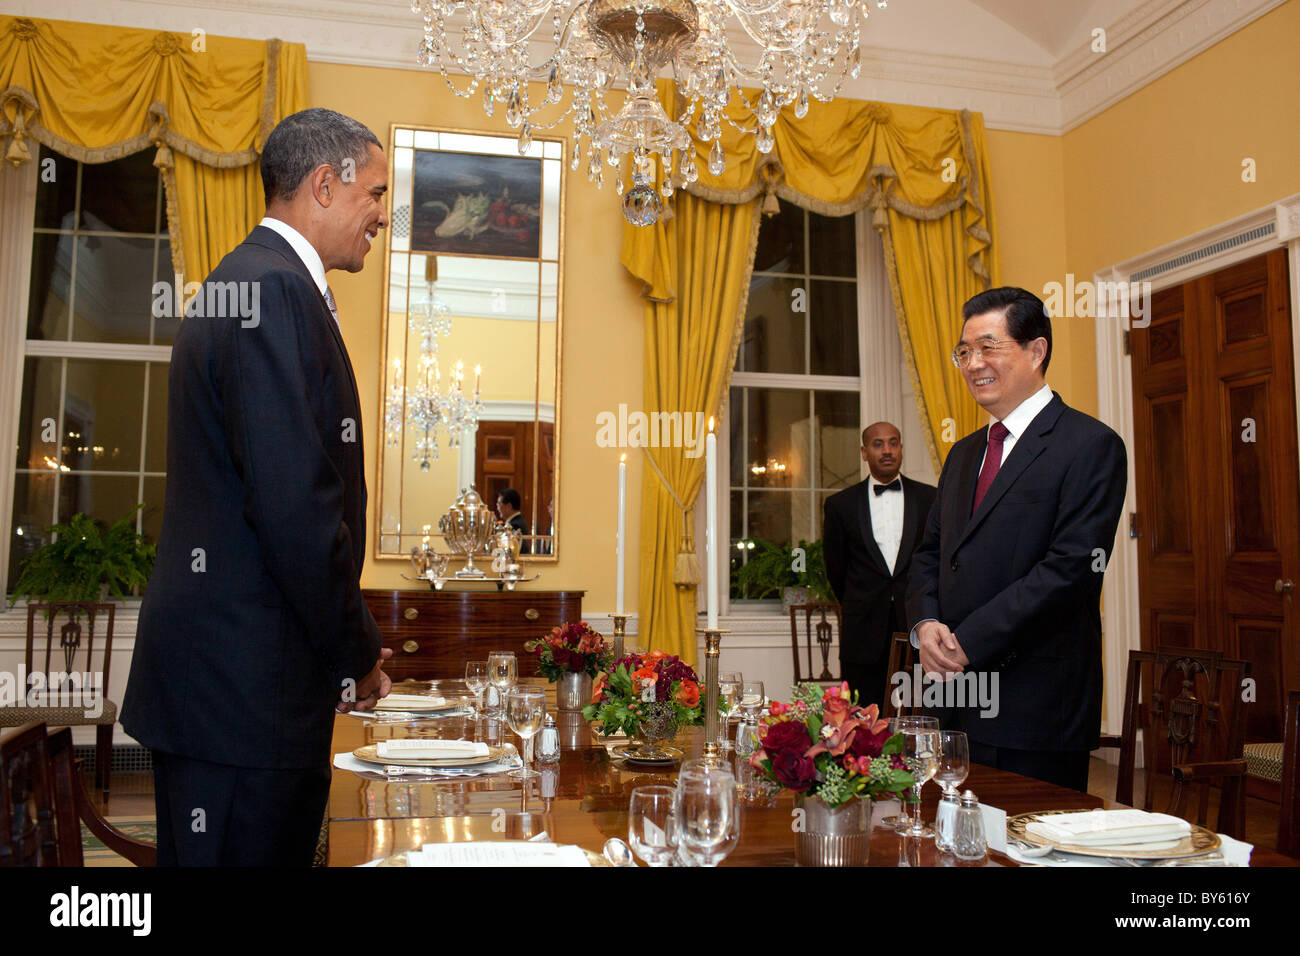 Barack Obama and President Hu Jintao of China begin their working dinner in the Old Family Dining Room of the White House Stock Photo